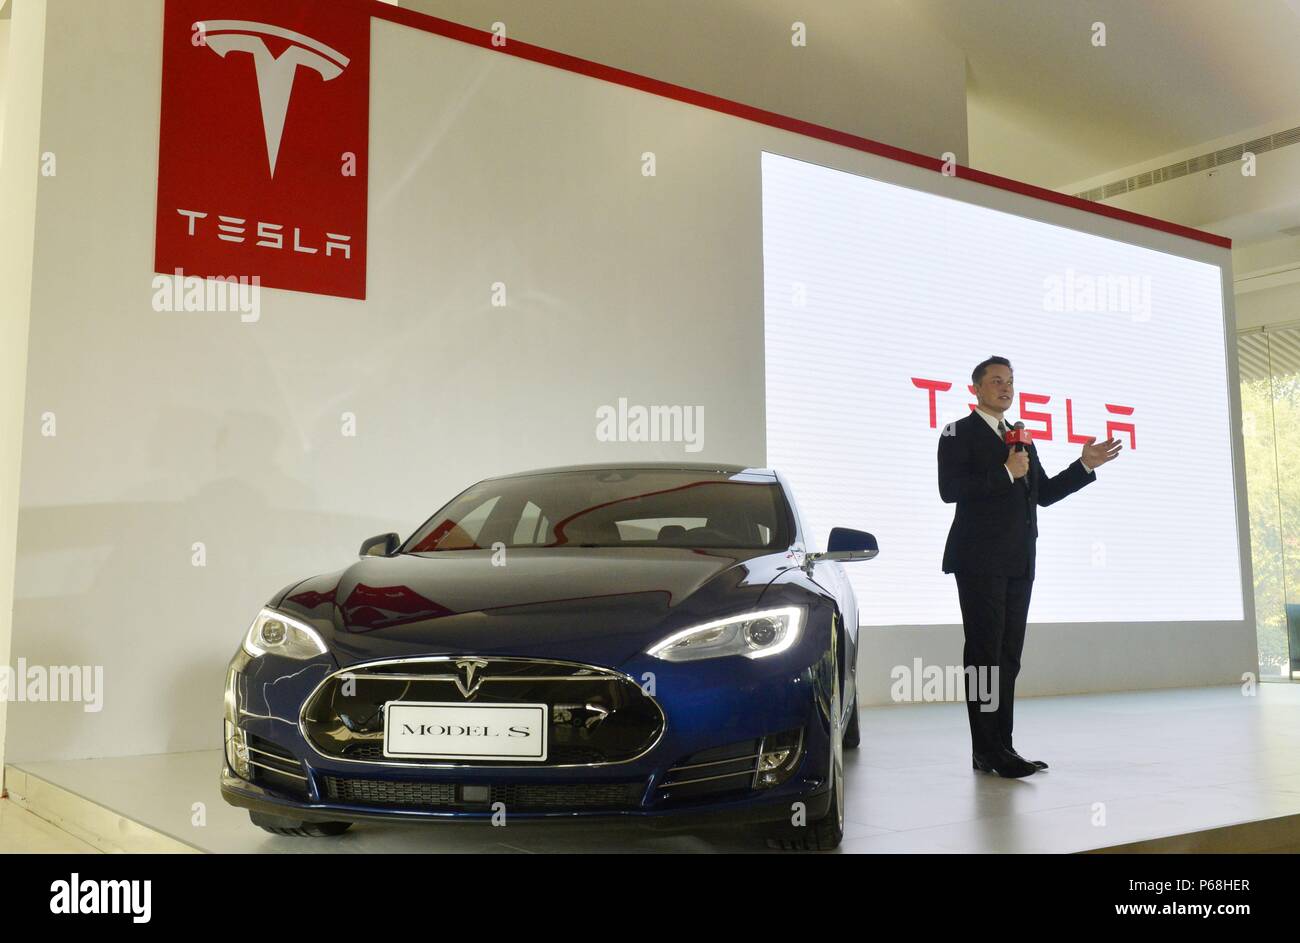 180629) -- BEIJING, June 29, 2018 (Xinhua) -- Tesla CEO Elon Musk  introduces the new firmware of Tesla electric car for the Chinese users  during a press conference in Beijing, capital of